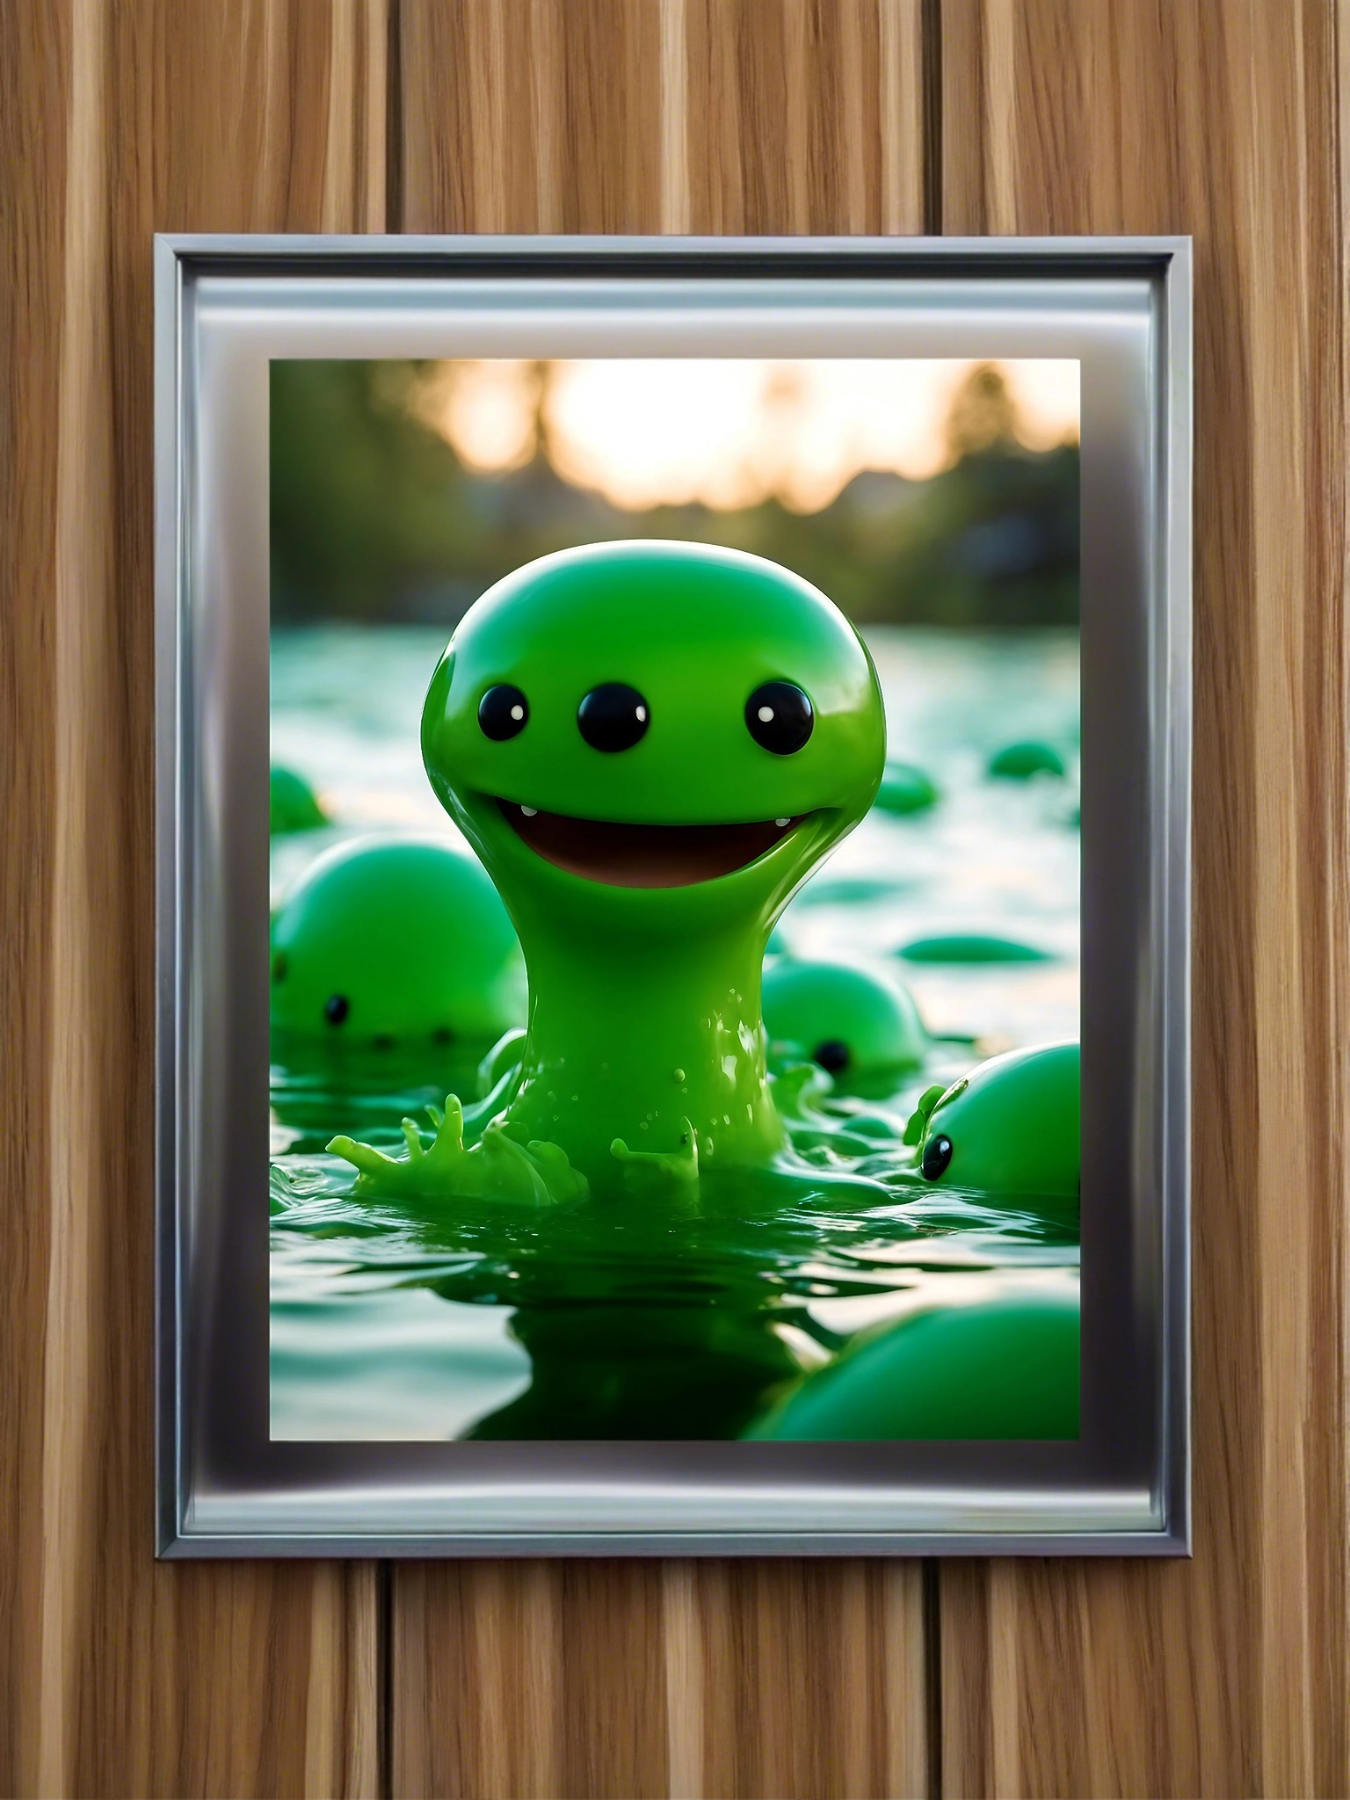 Cute green slime monsters in the lake - fantasy mini photo poster - 27x20 cm 3